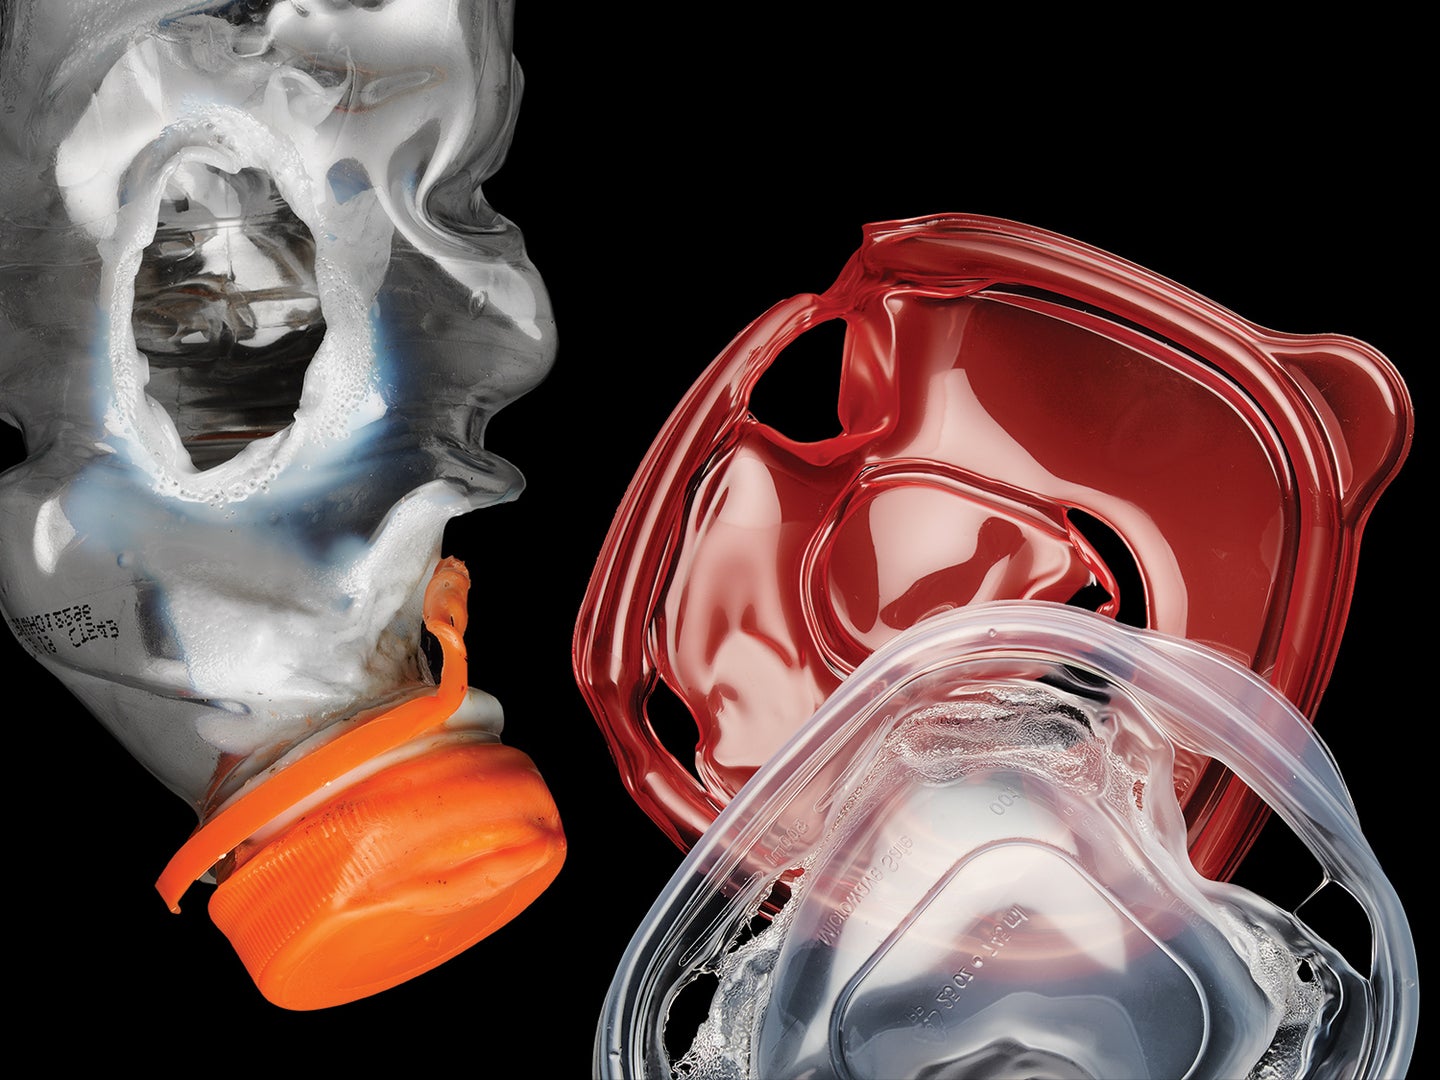 melted plasticware